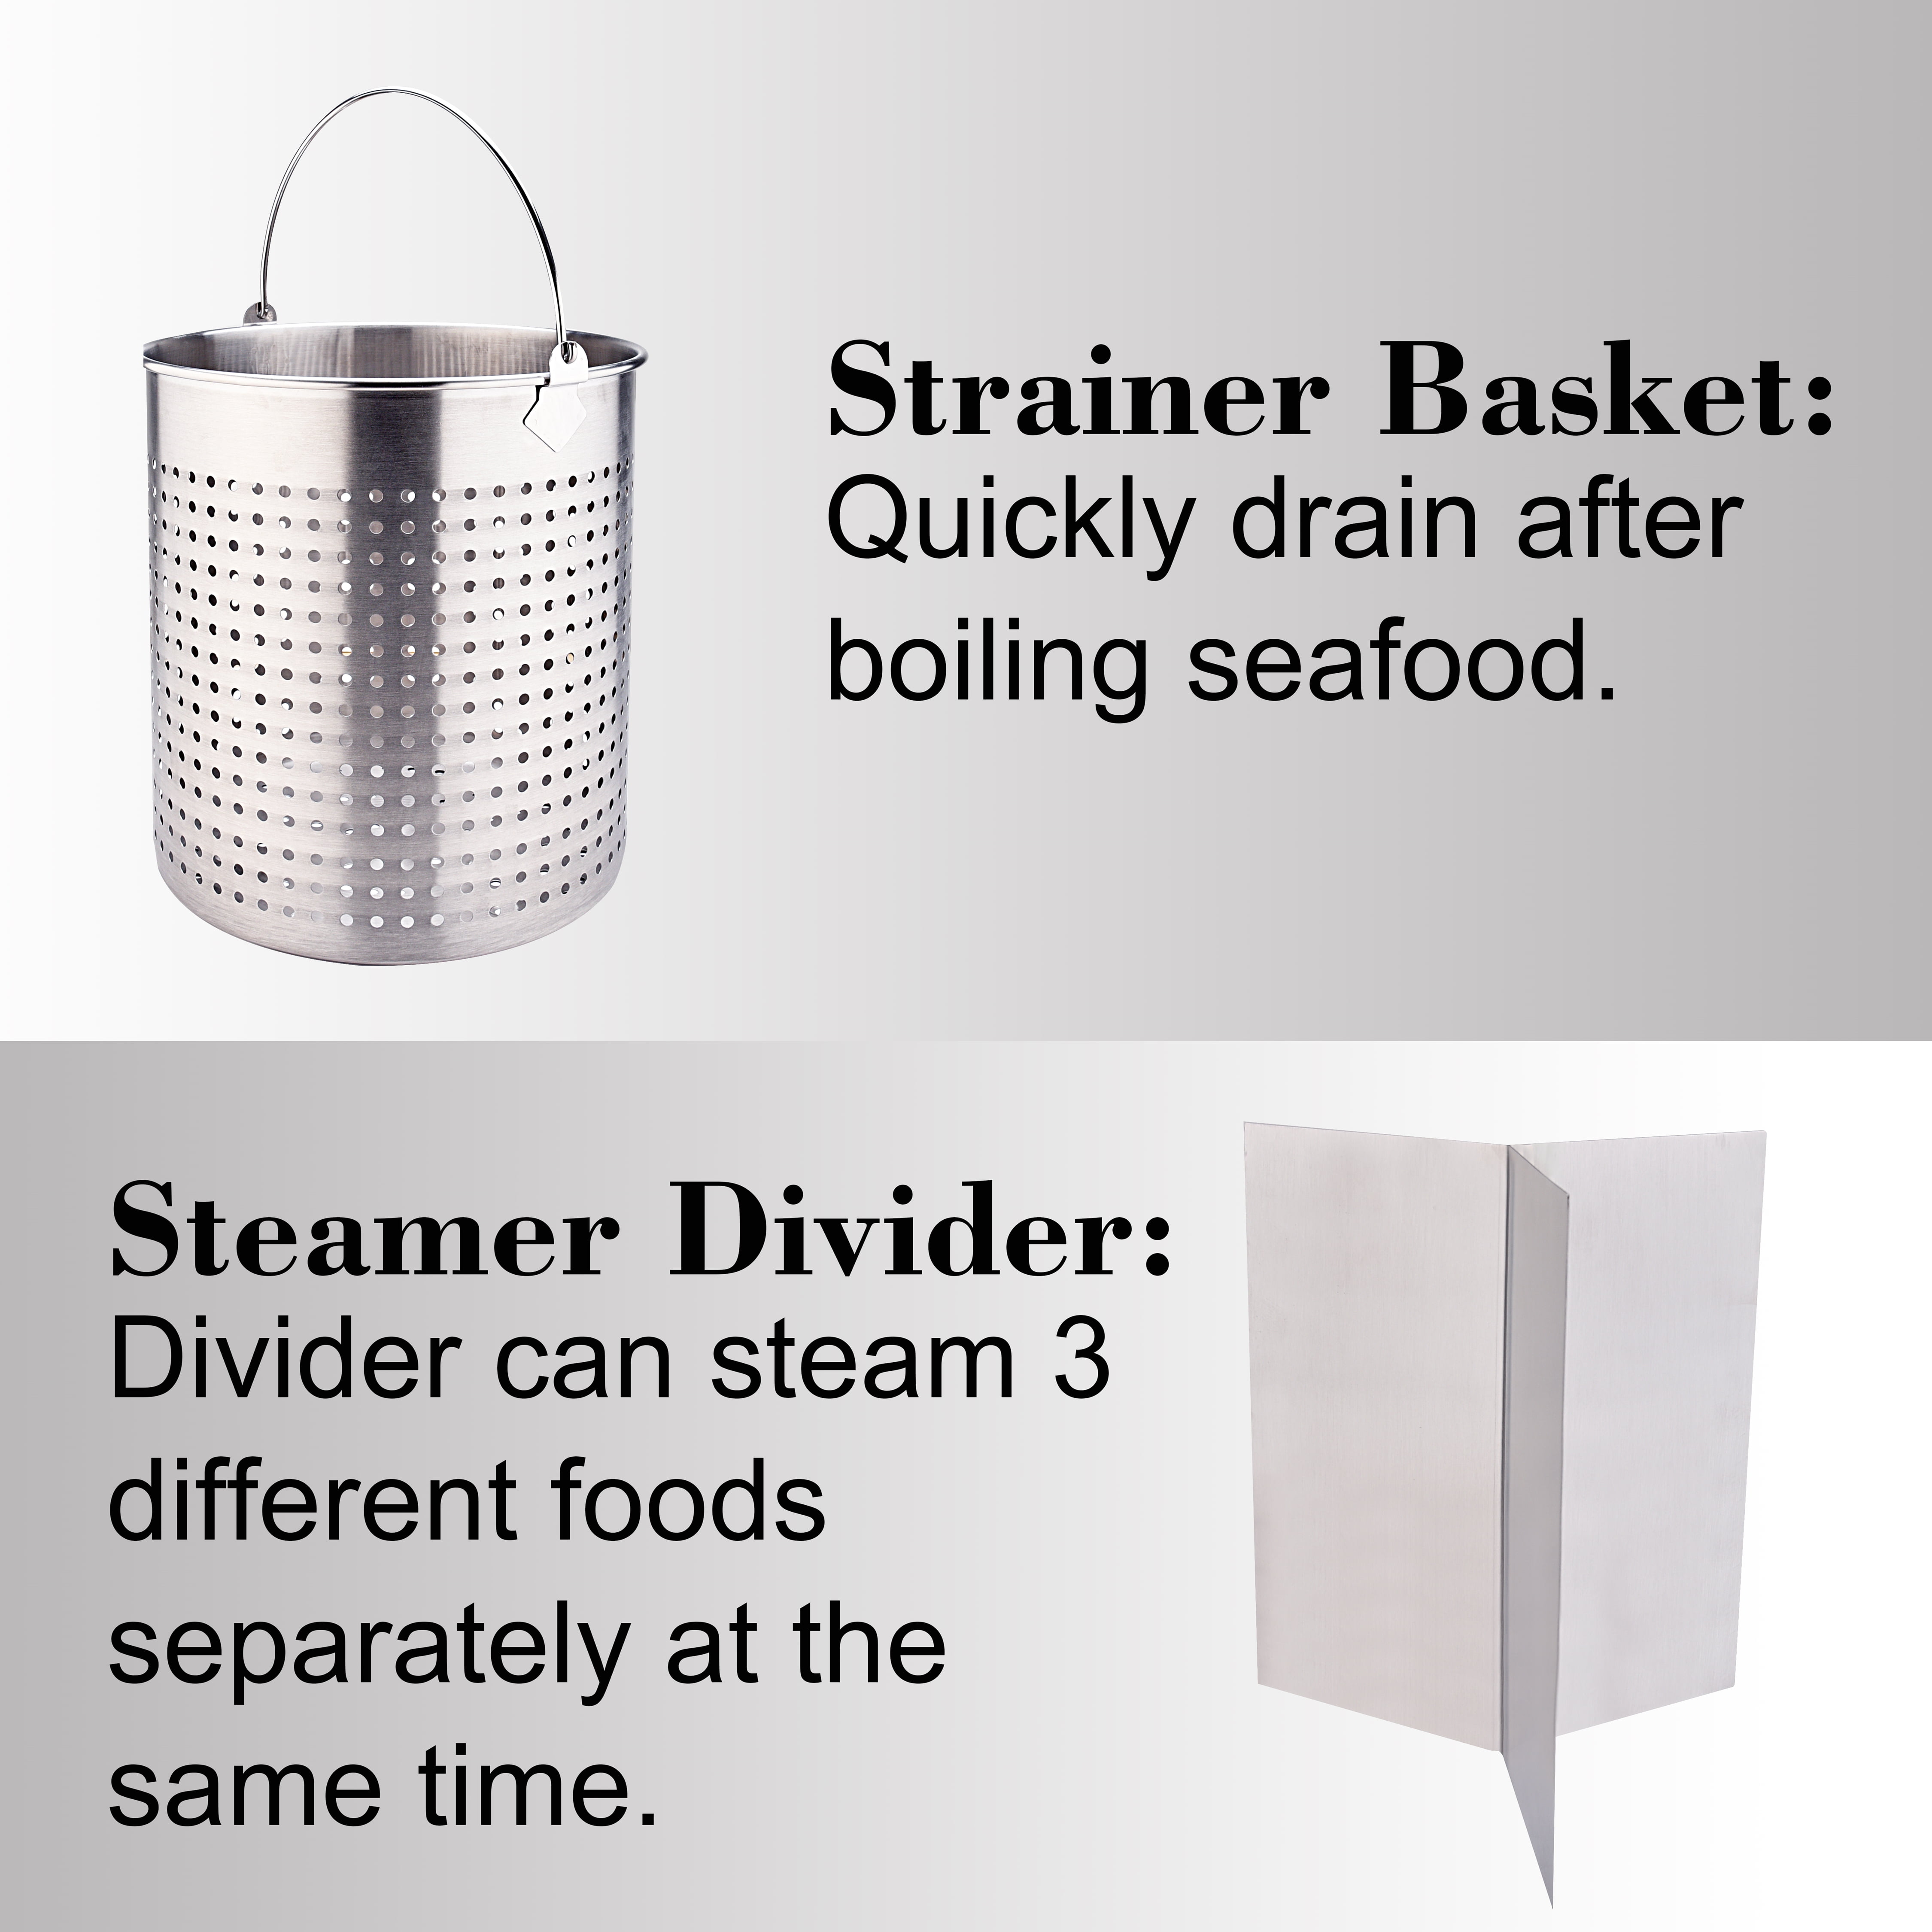  ARC 64-QT Large Stainless Steel Stockpot for Seafood Boiler  Crawfish Pot w/Basket and Steamer Rack, Outdoor Cooking Pot for Crab Lobster  Shrimp Boiling, and Tamales Steamer,16 Gal: Home & Kitchen